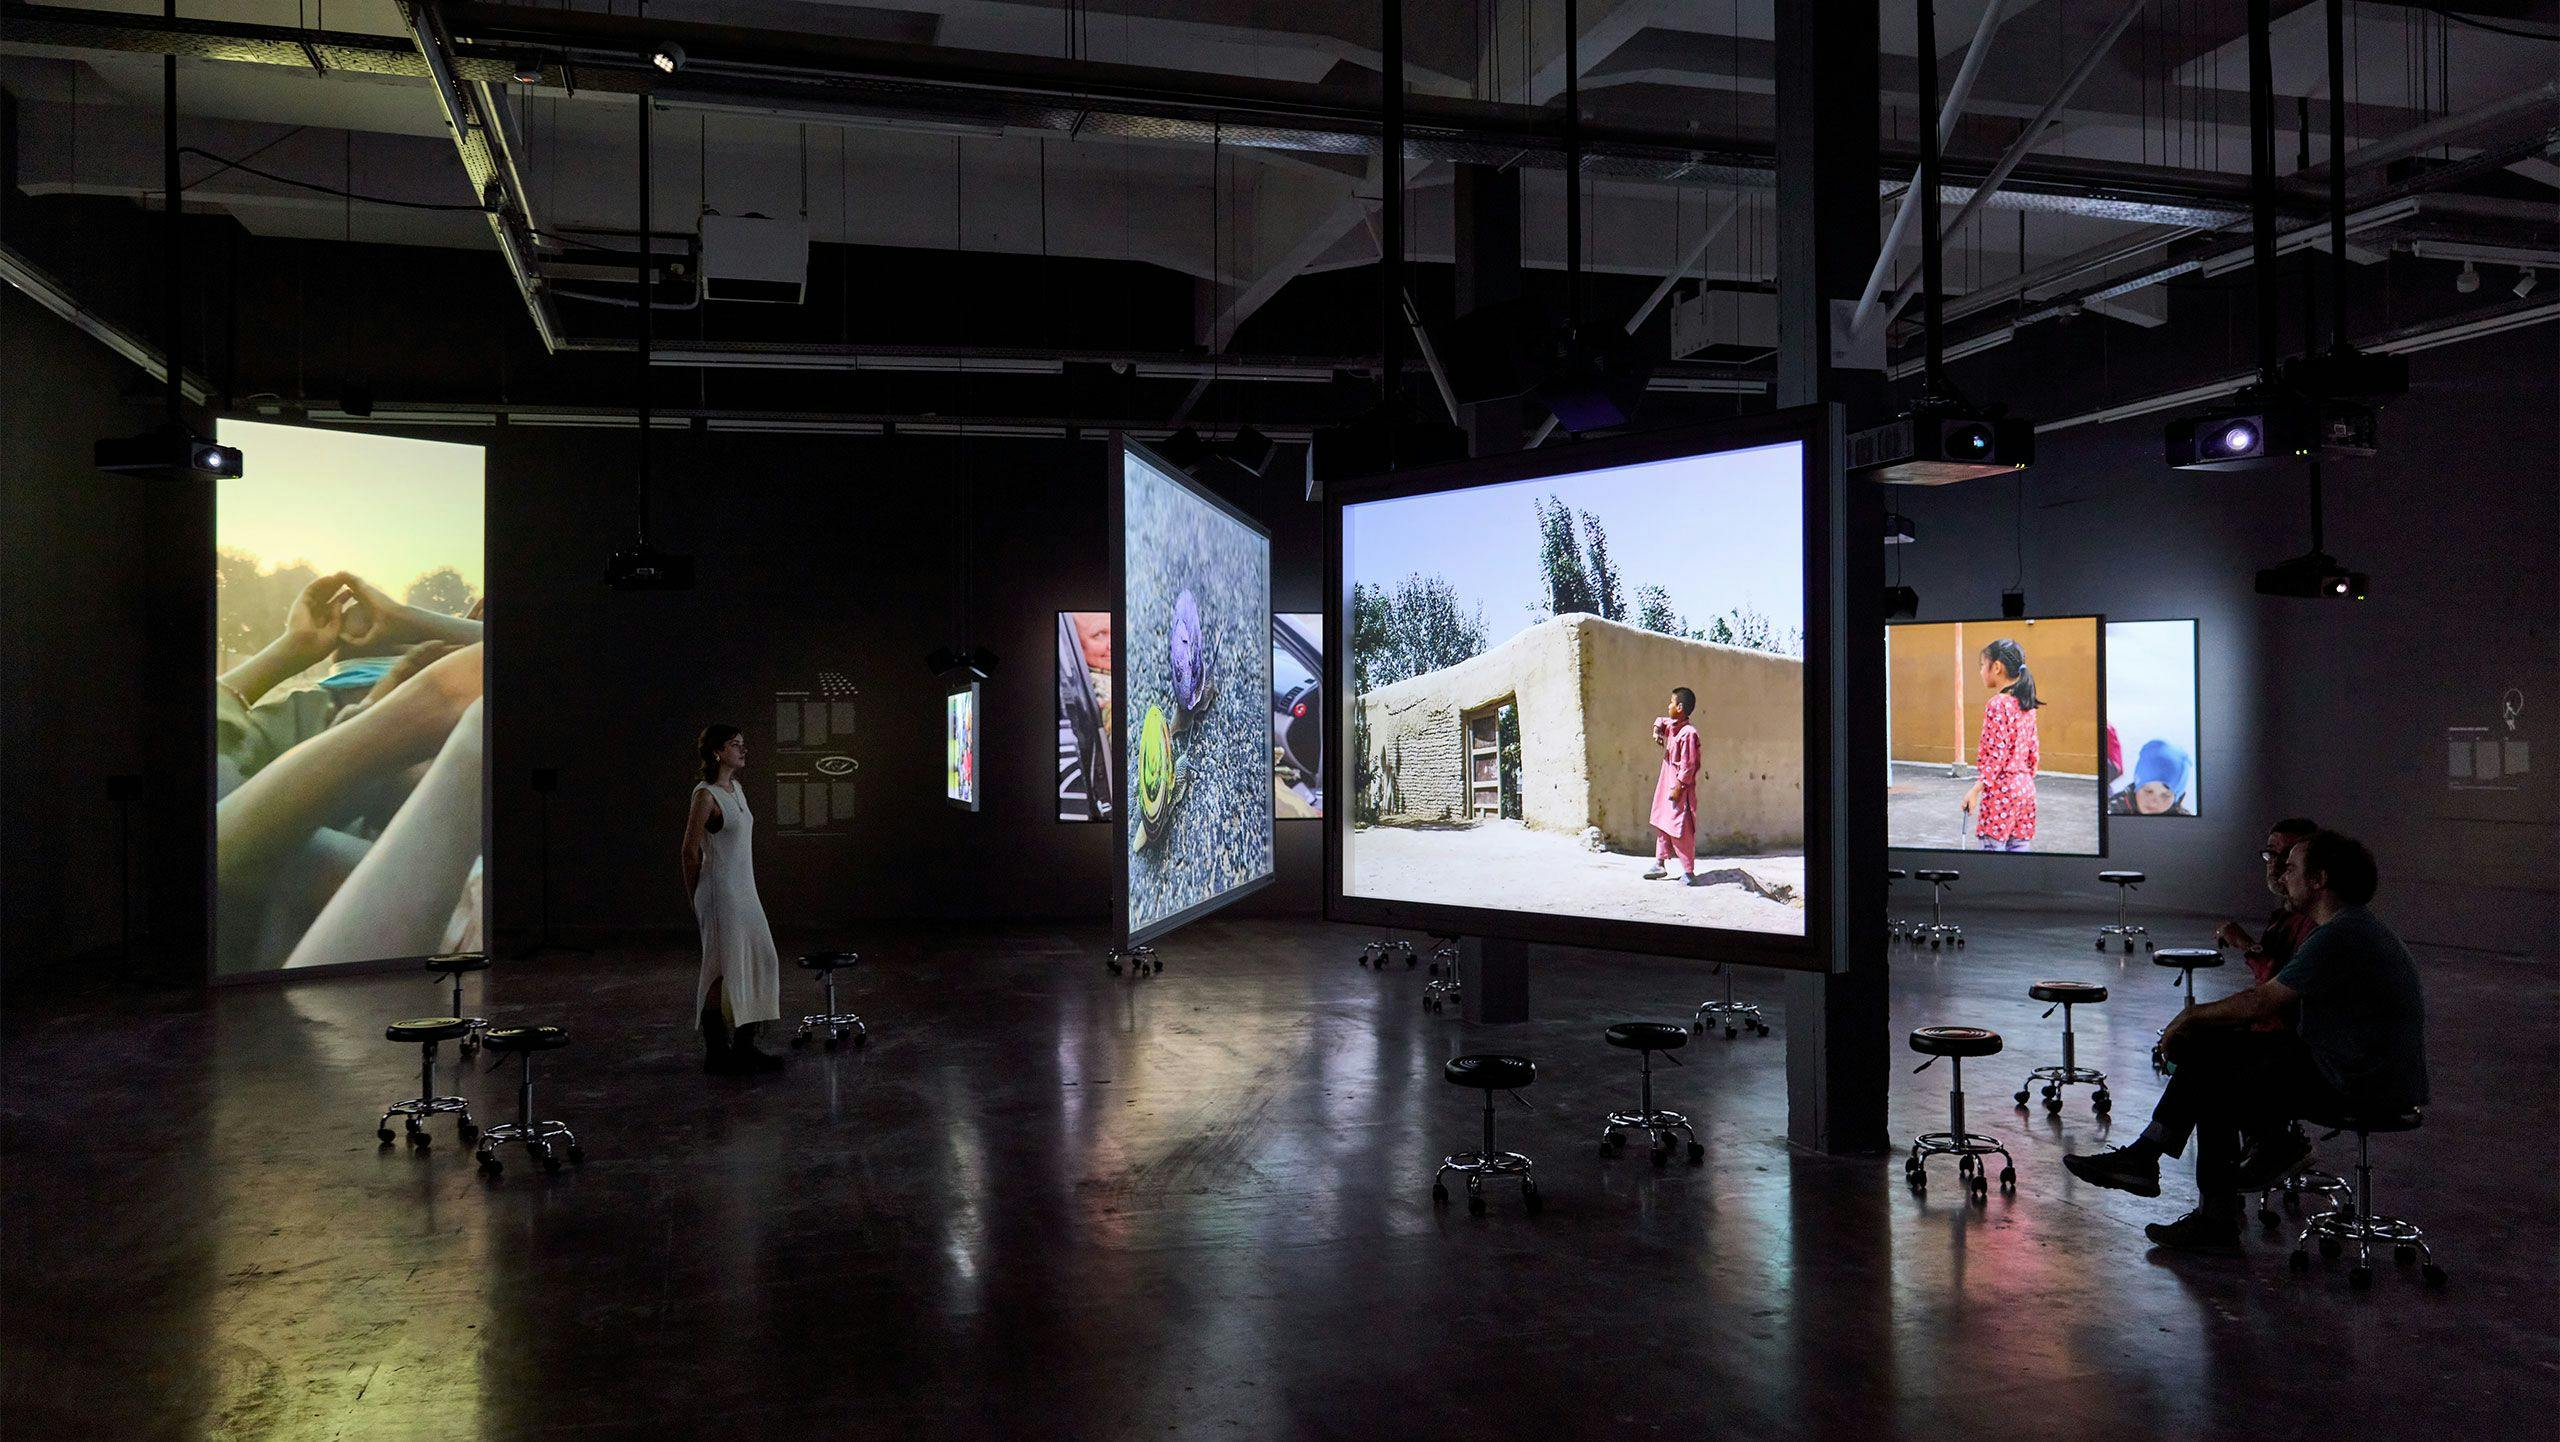 Installation view of the exhibition, Francis Alÿs: The Nature of the Game, at WIELS in Brussels, Belgium, dated 2023.